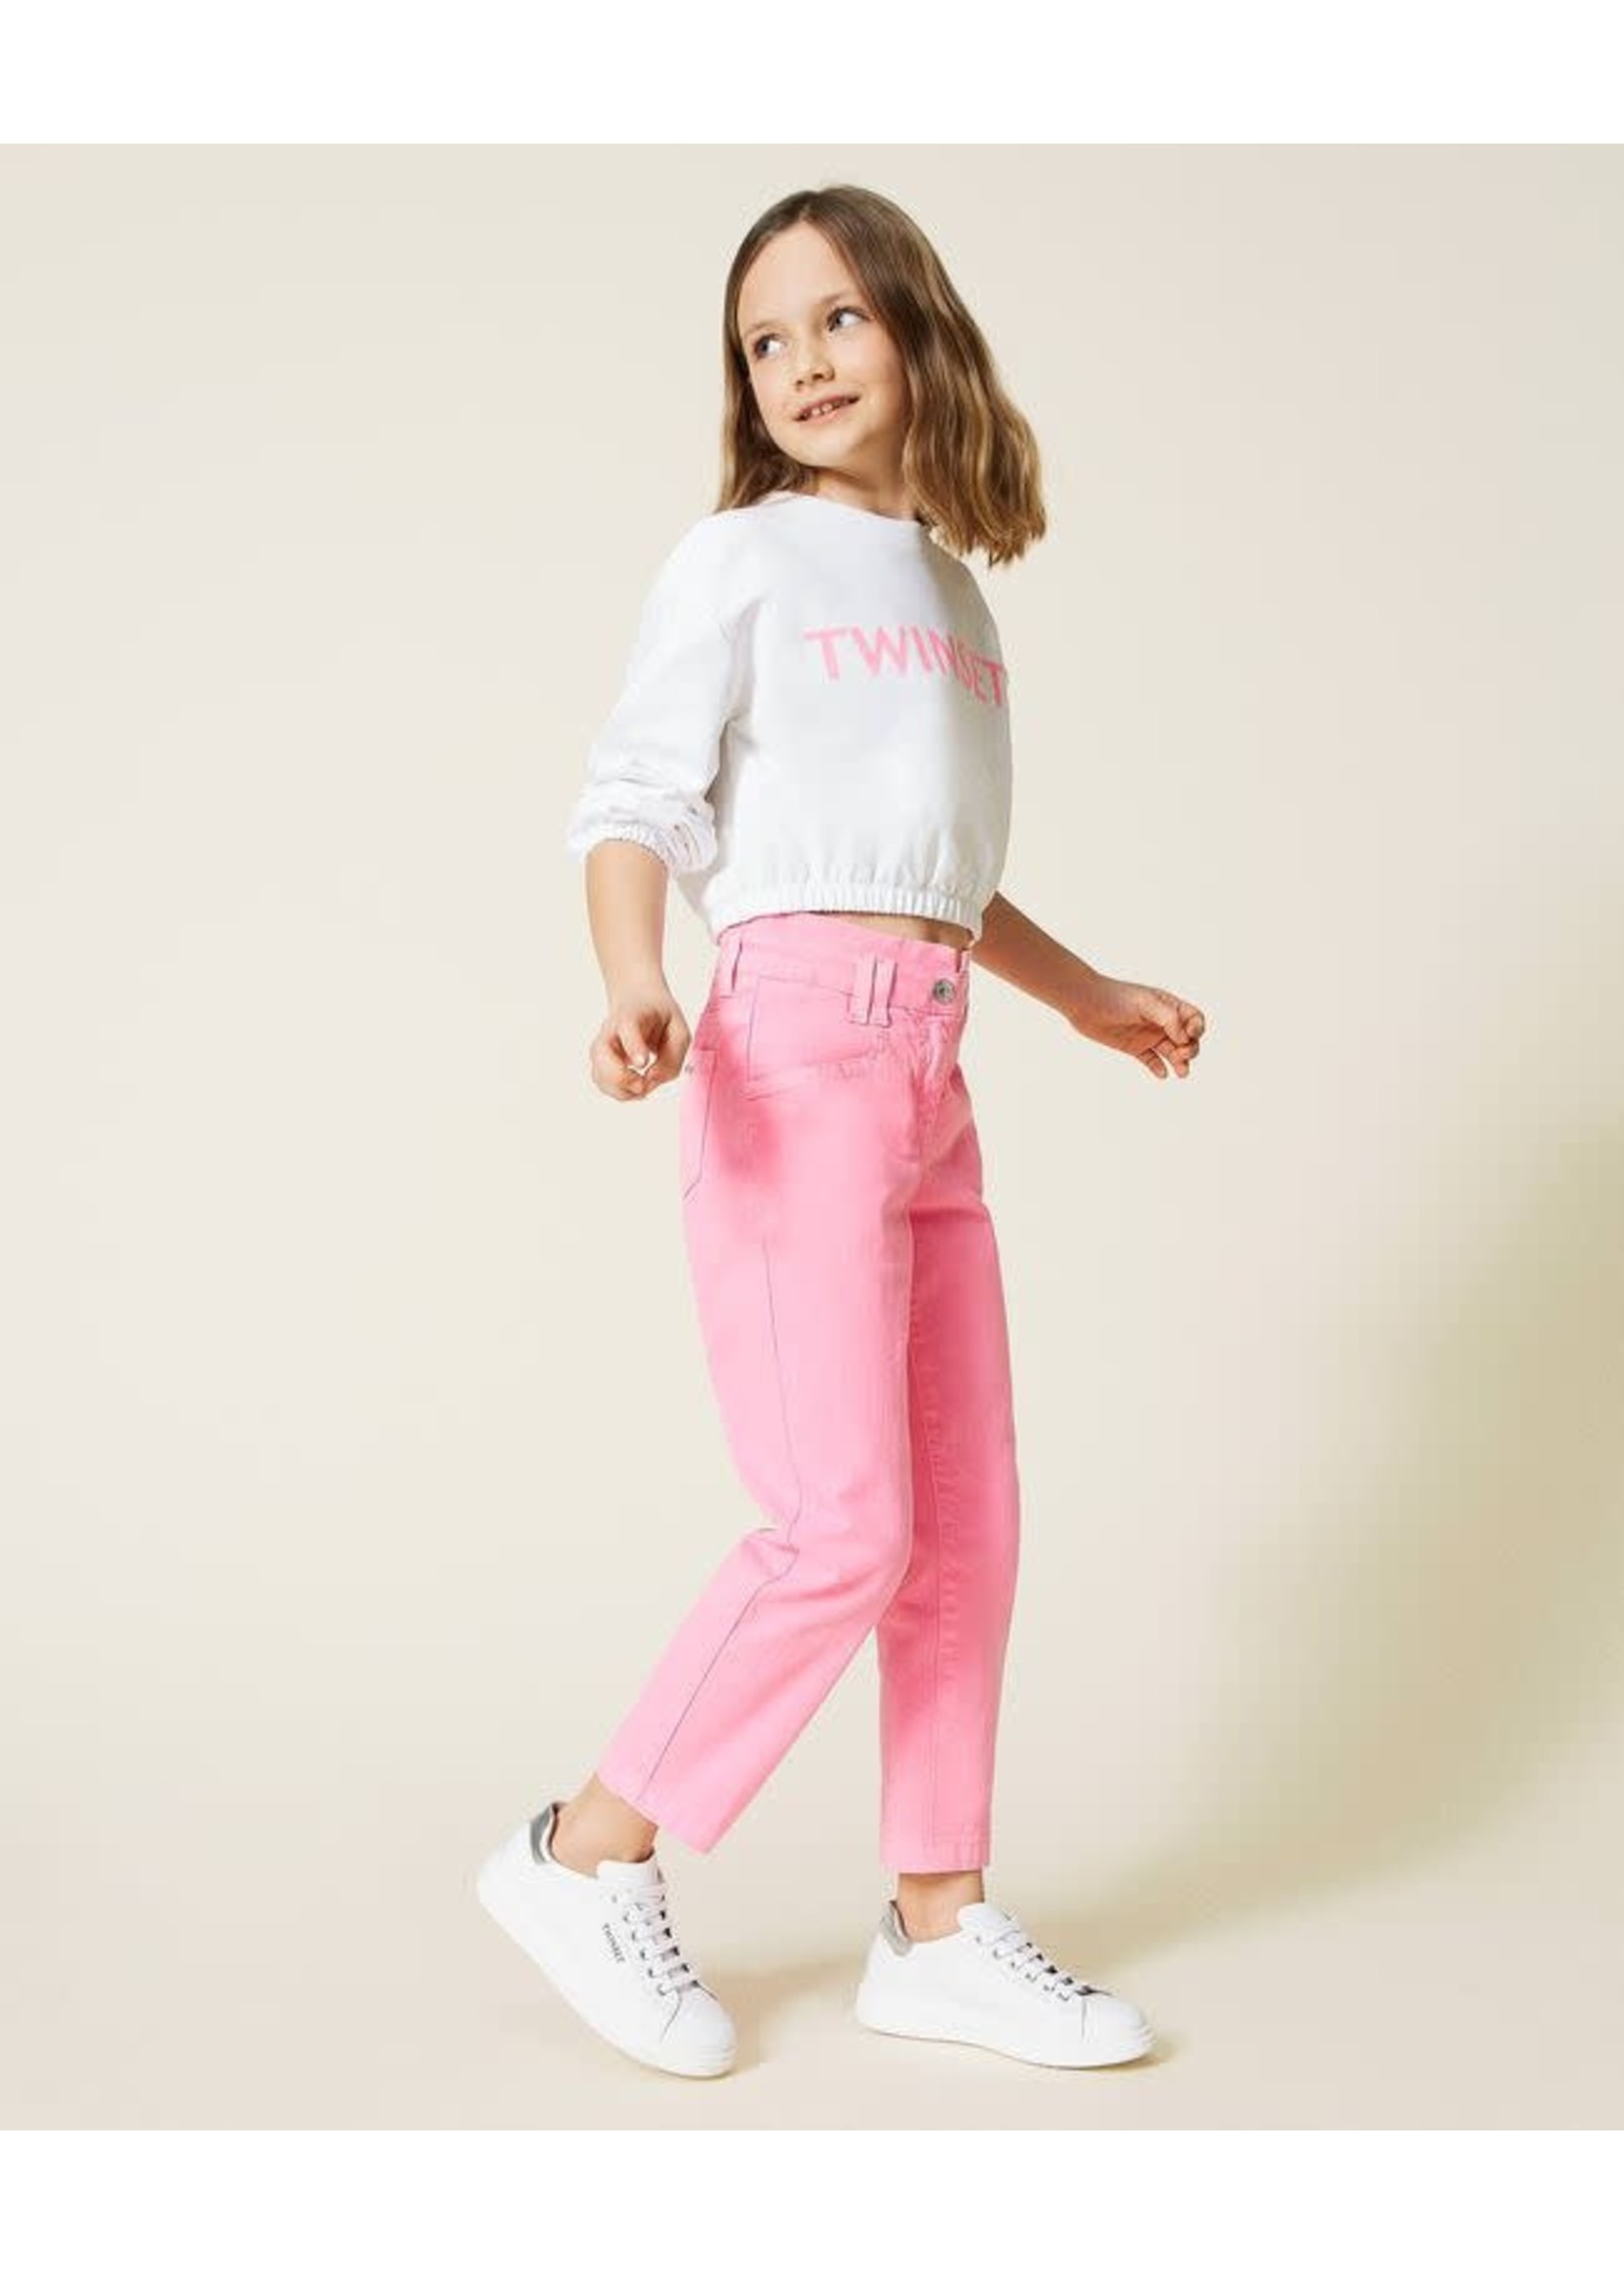 Twinset Twinset sweater offwhite logo pink - 221GJ2260